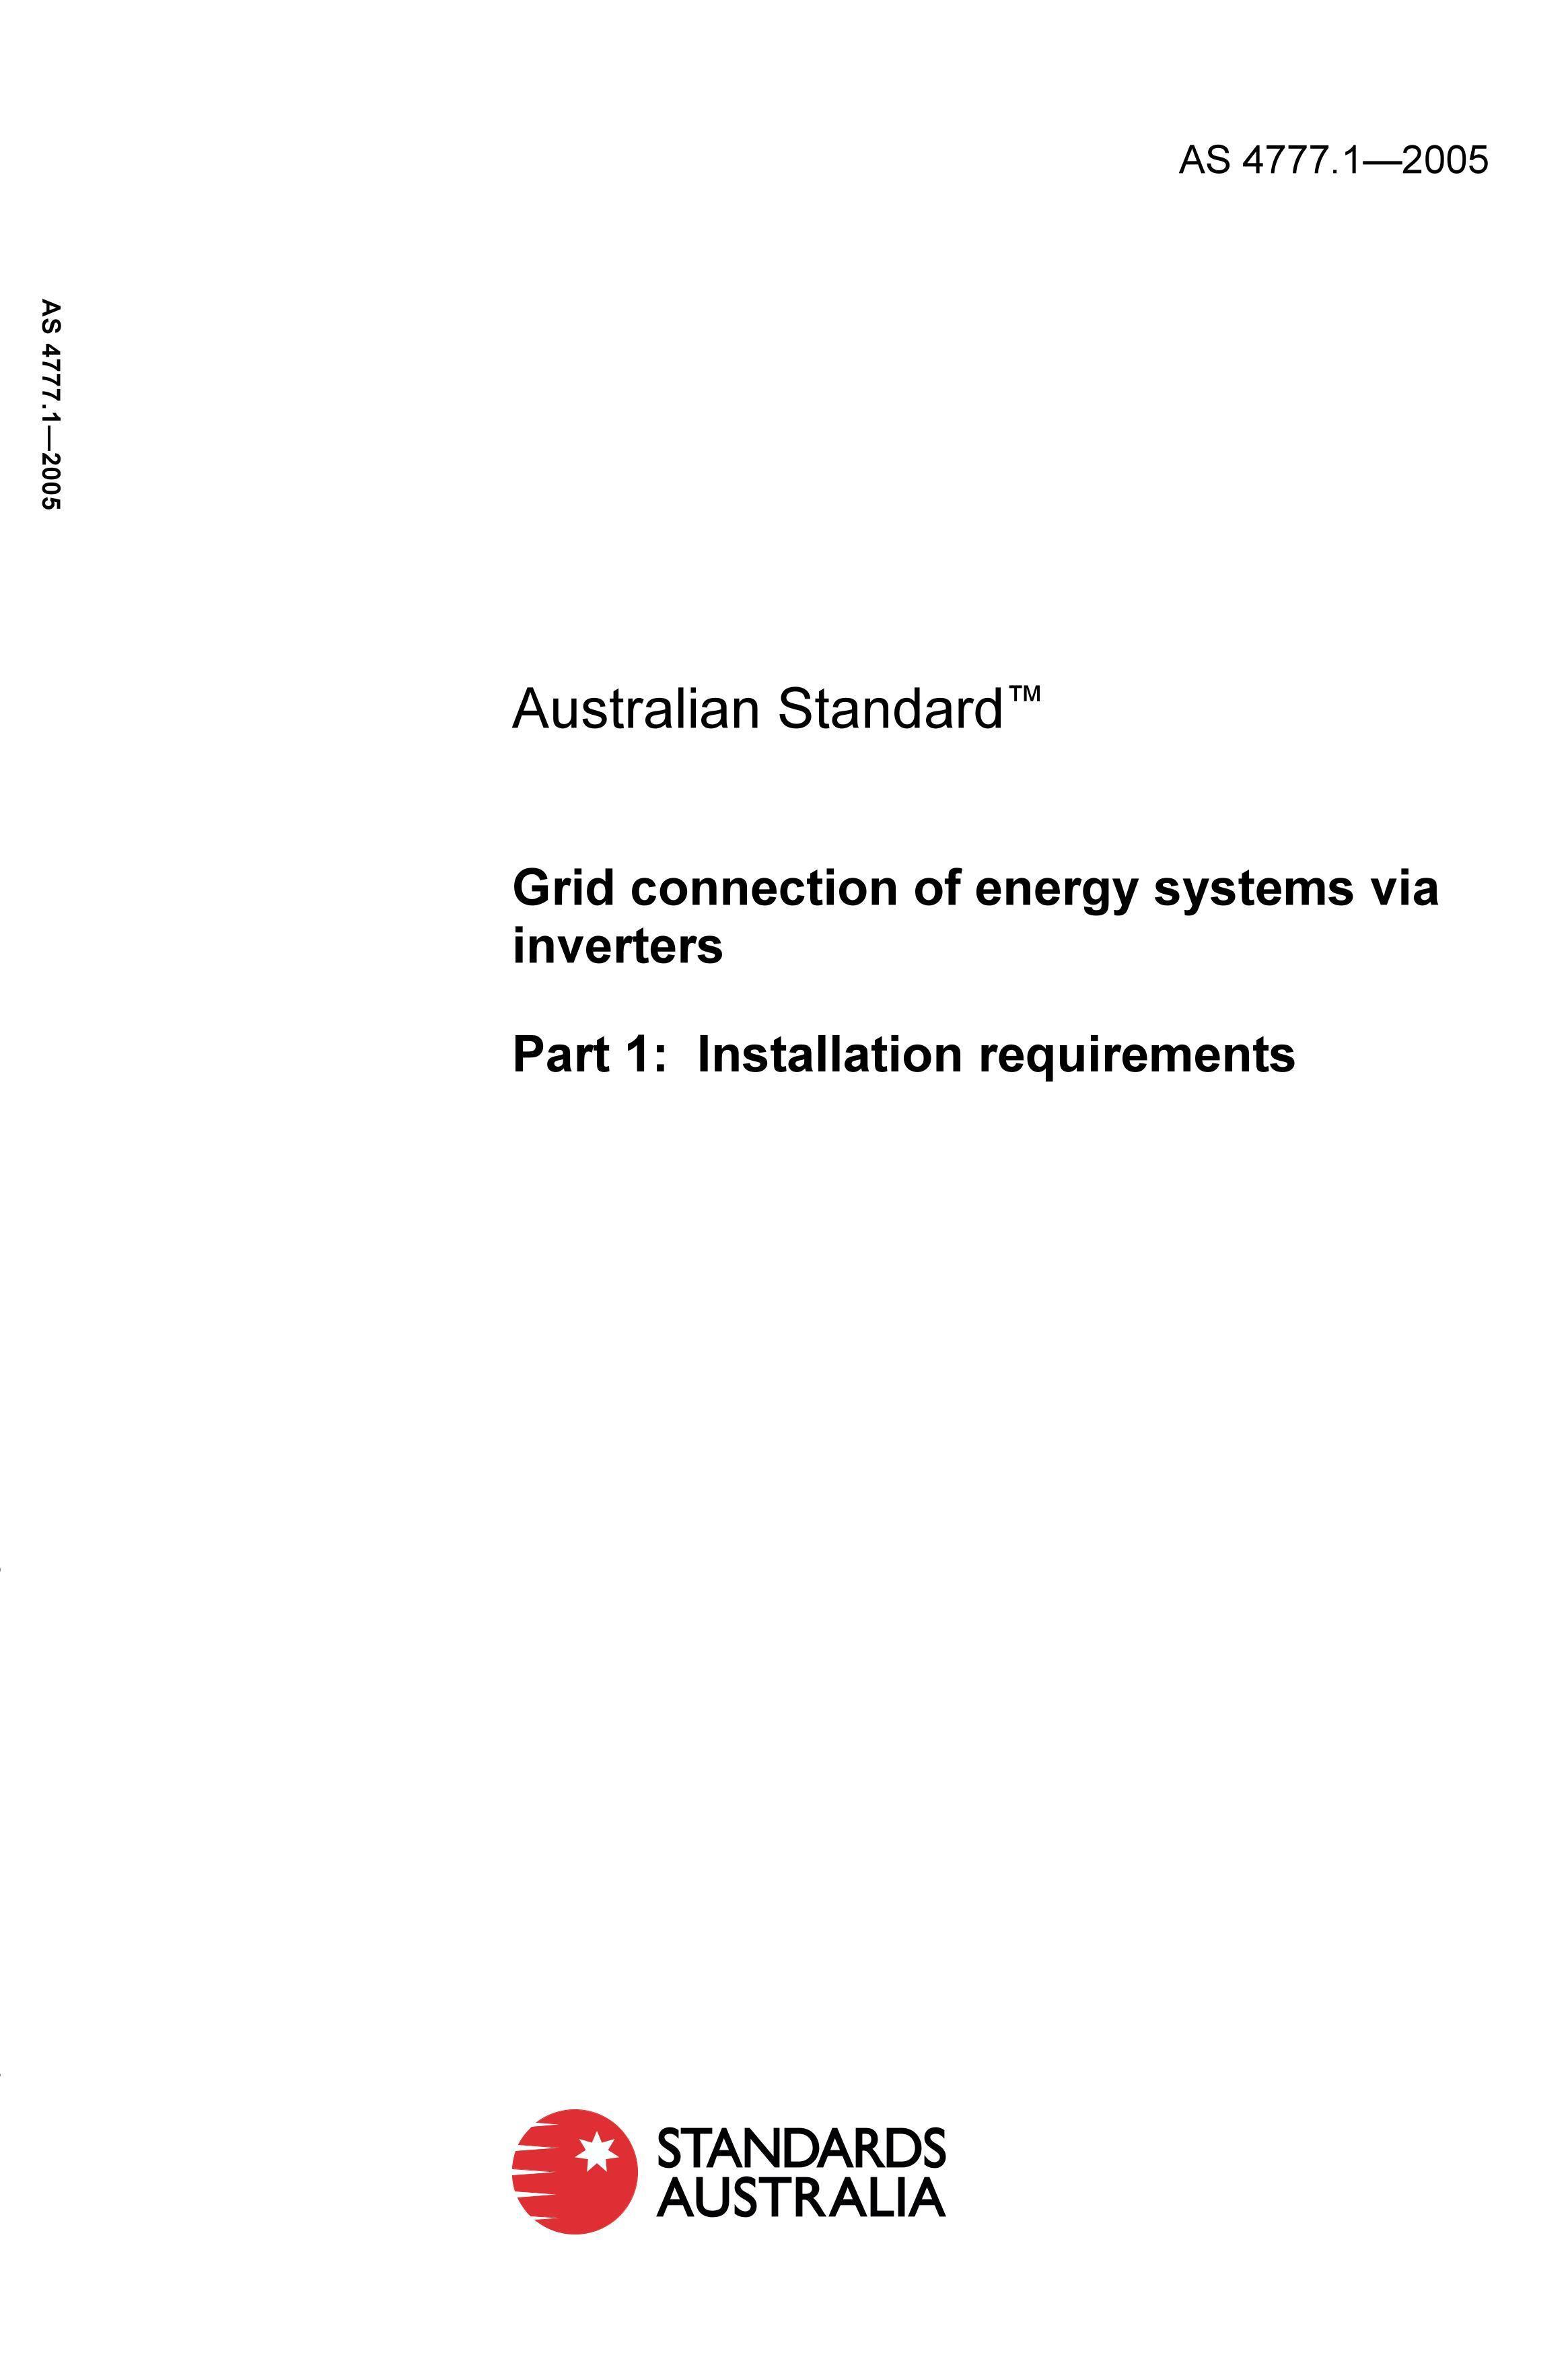 AS 4777.1-2005 Grid connection of energy systems via inverters Part 1 Installation requirements .pdf1ҳ